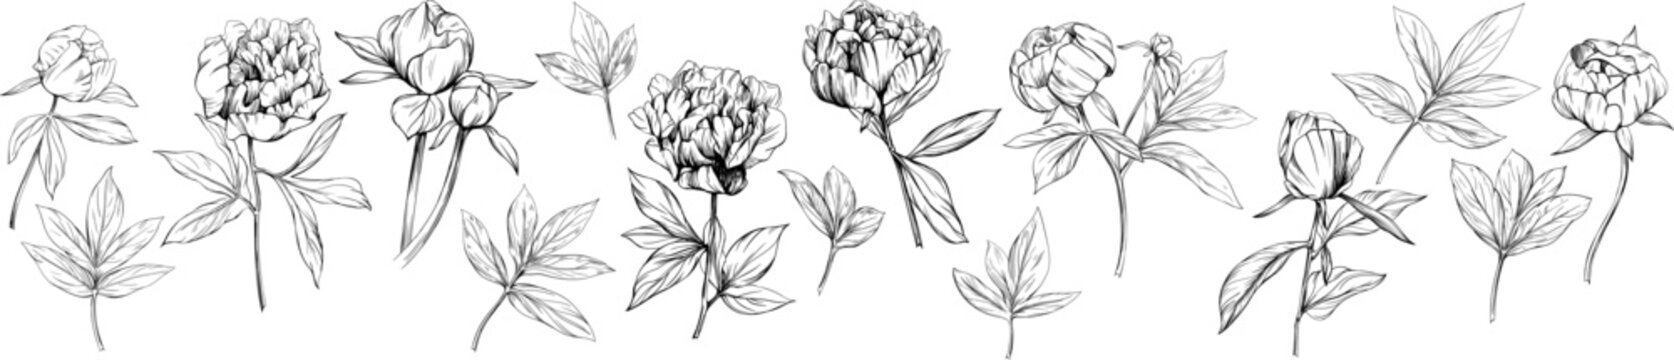 Peony floral botanical flower hand drawn. Wild spring leaf wildflower isolated. Black and white engraved ink art collection. Isolated peony illustration element on white background.